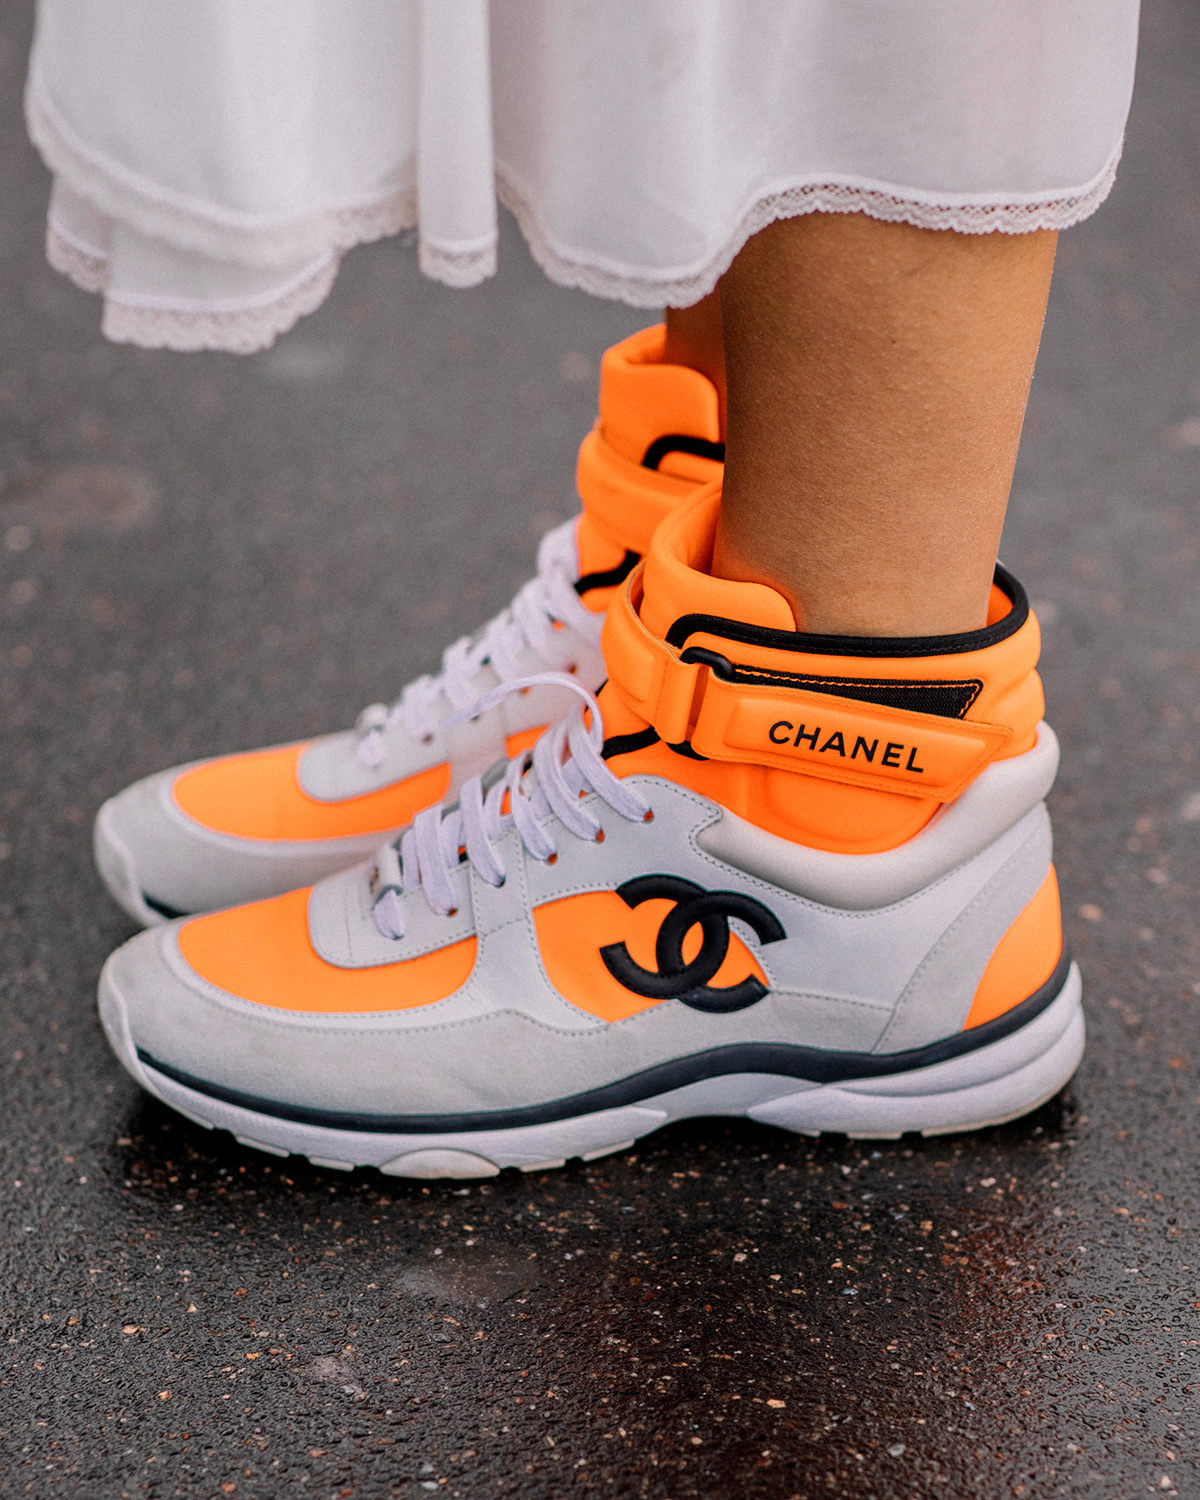 The Best Chanel Sneakers Released the Last Few